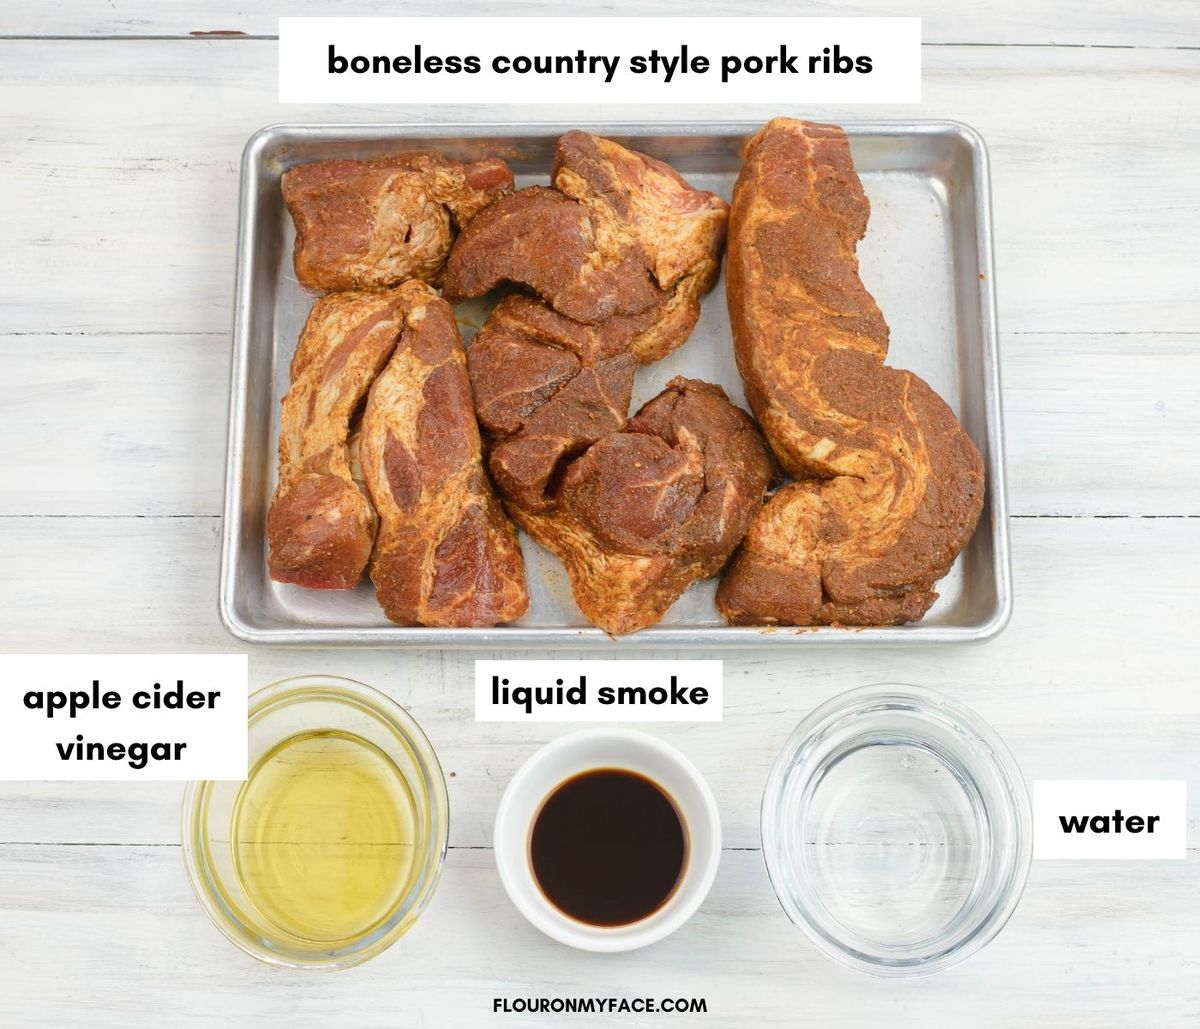 Image of the ingredients needed to pressure cook country style ribs.